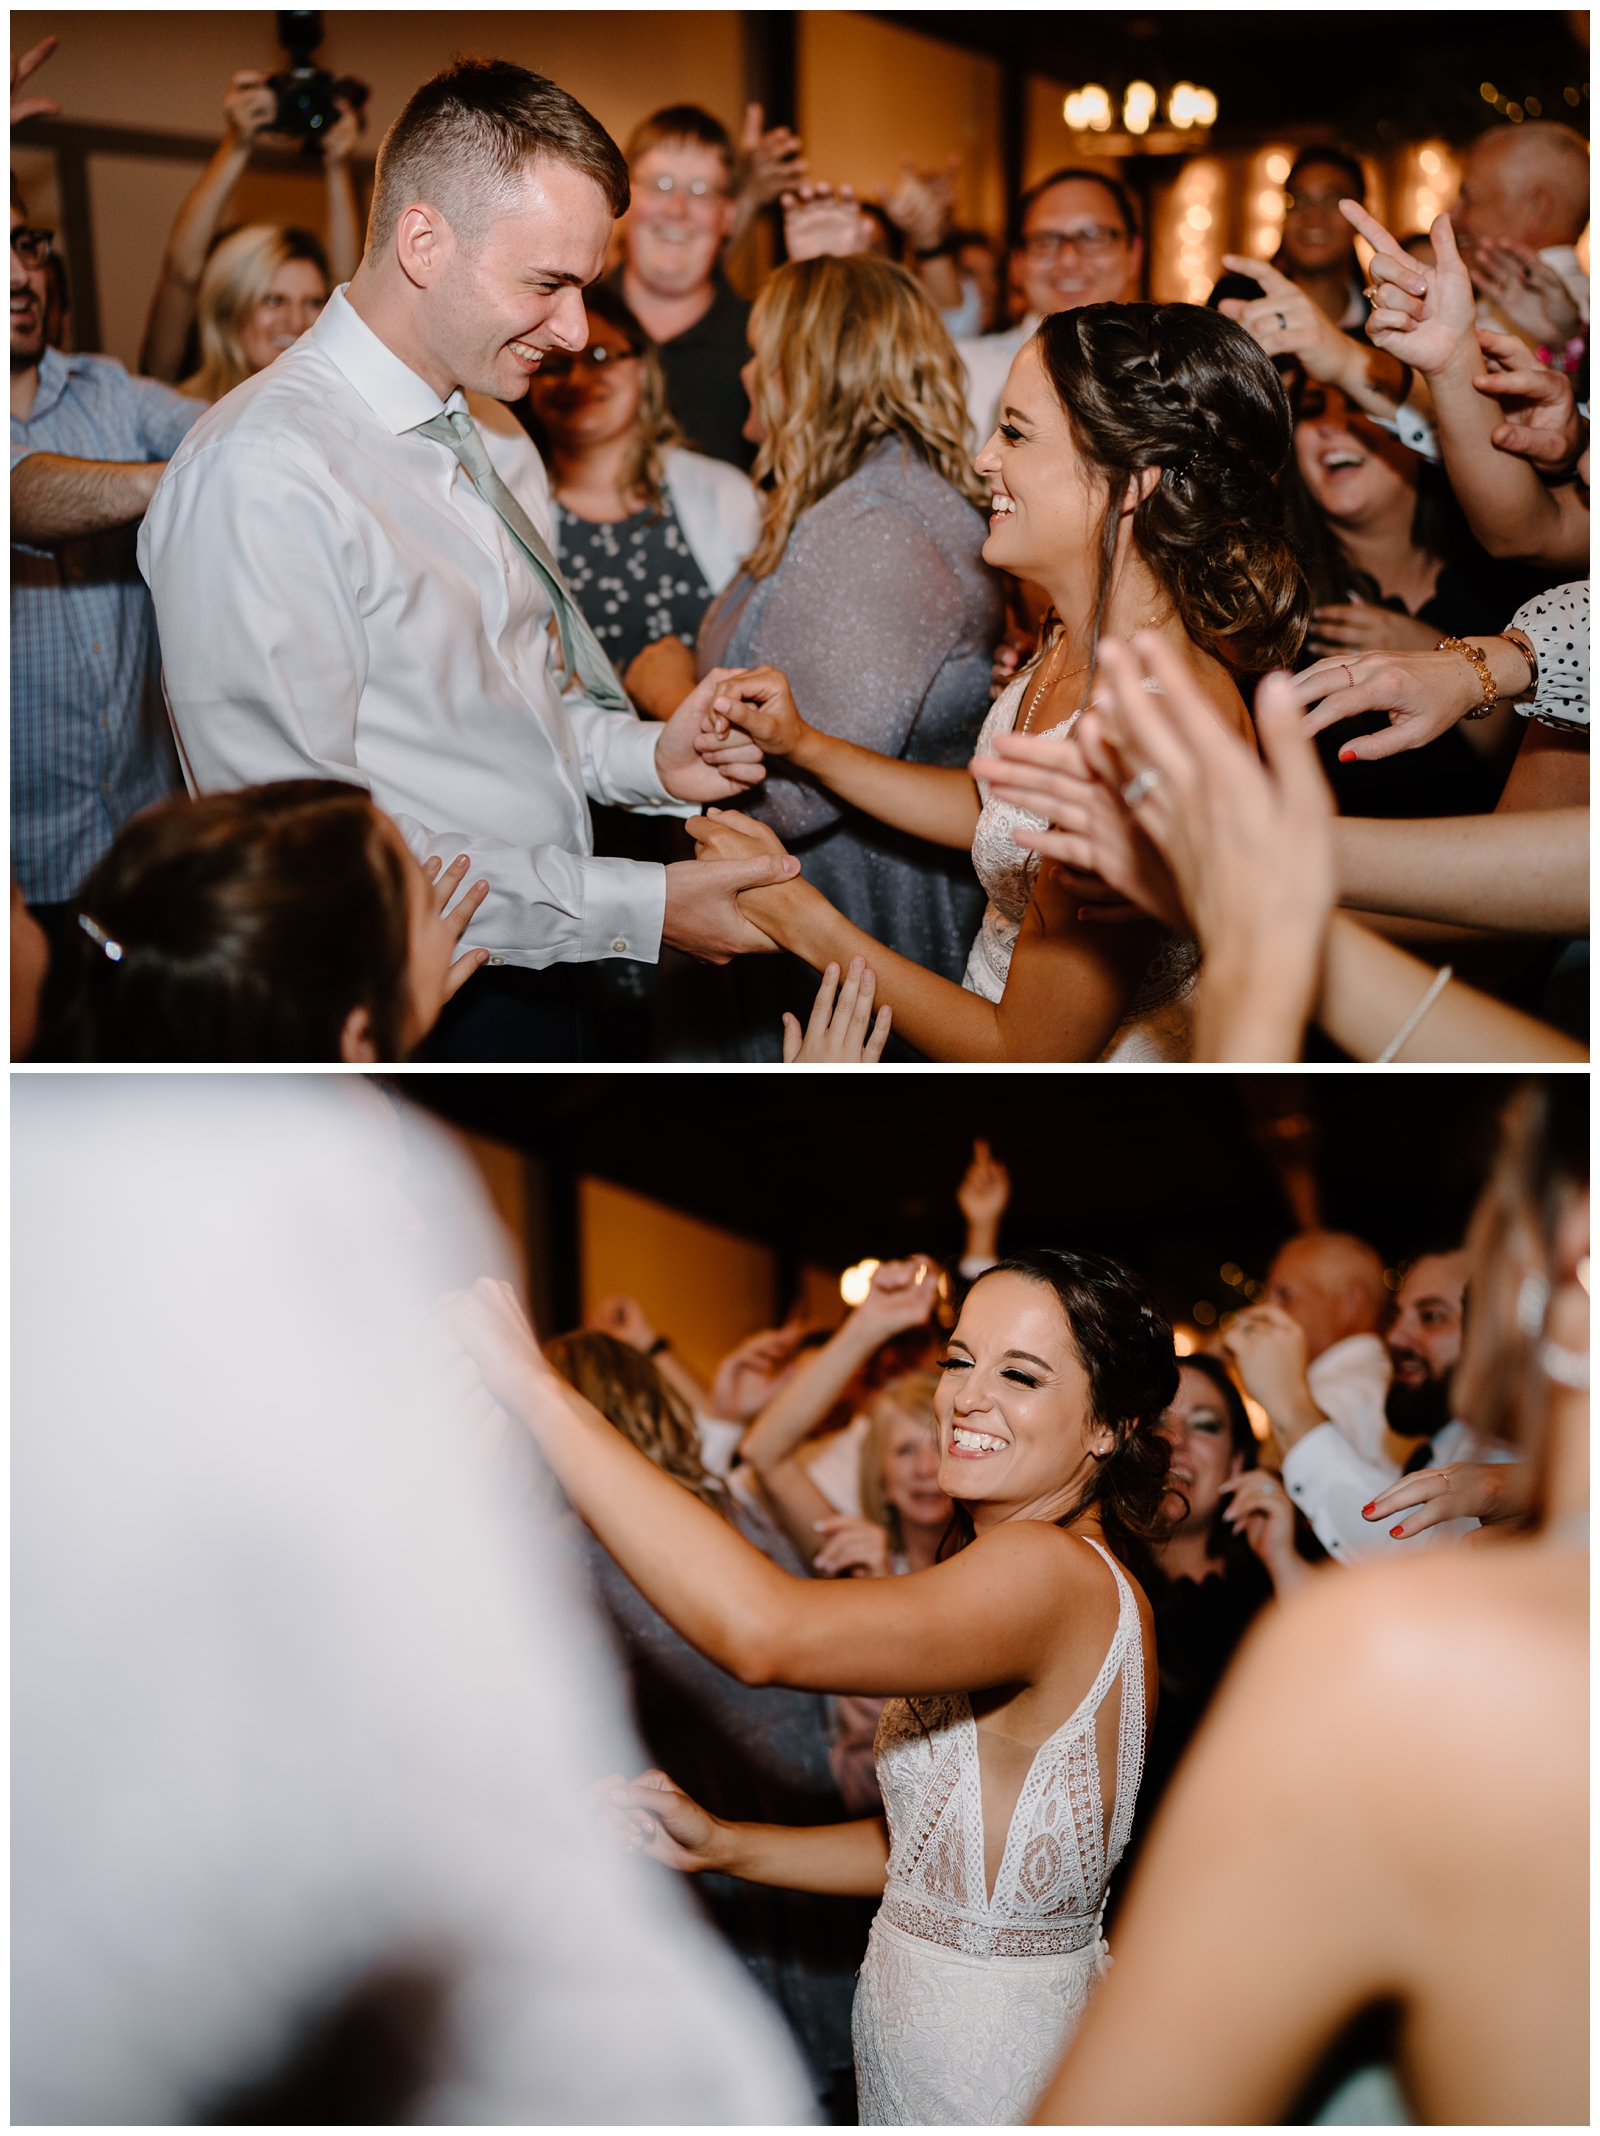 Fun dance floor reception photos with the bride and groom by North Carolina wedding photographer